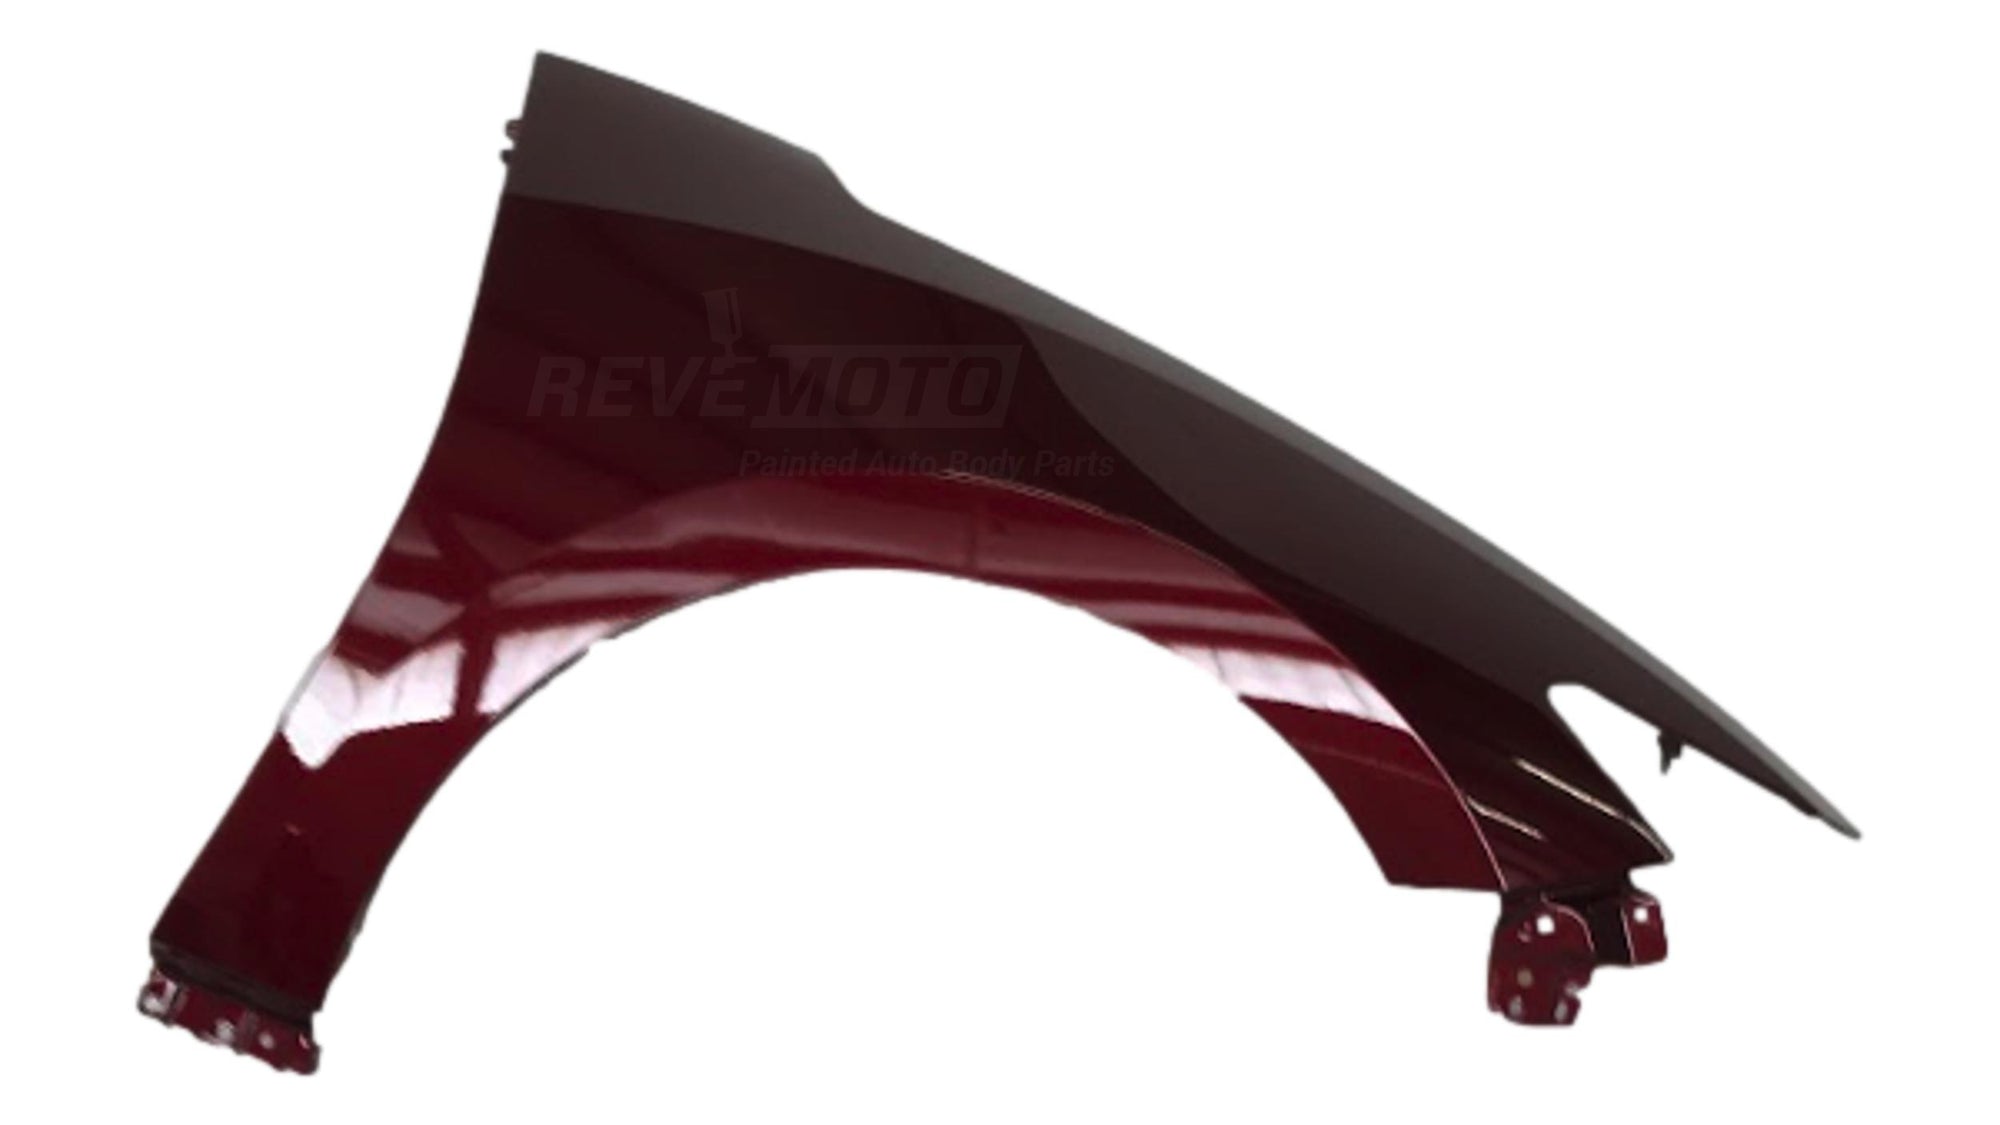 19719 - 2016-2020 Nissan Maxima Fender Painted Right, Passenger Side Coulis Red Metallic (NAW) 631004RA0A NI1241224